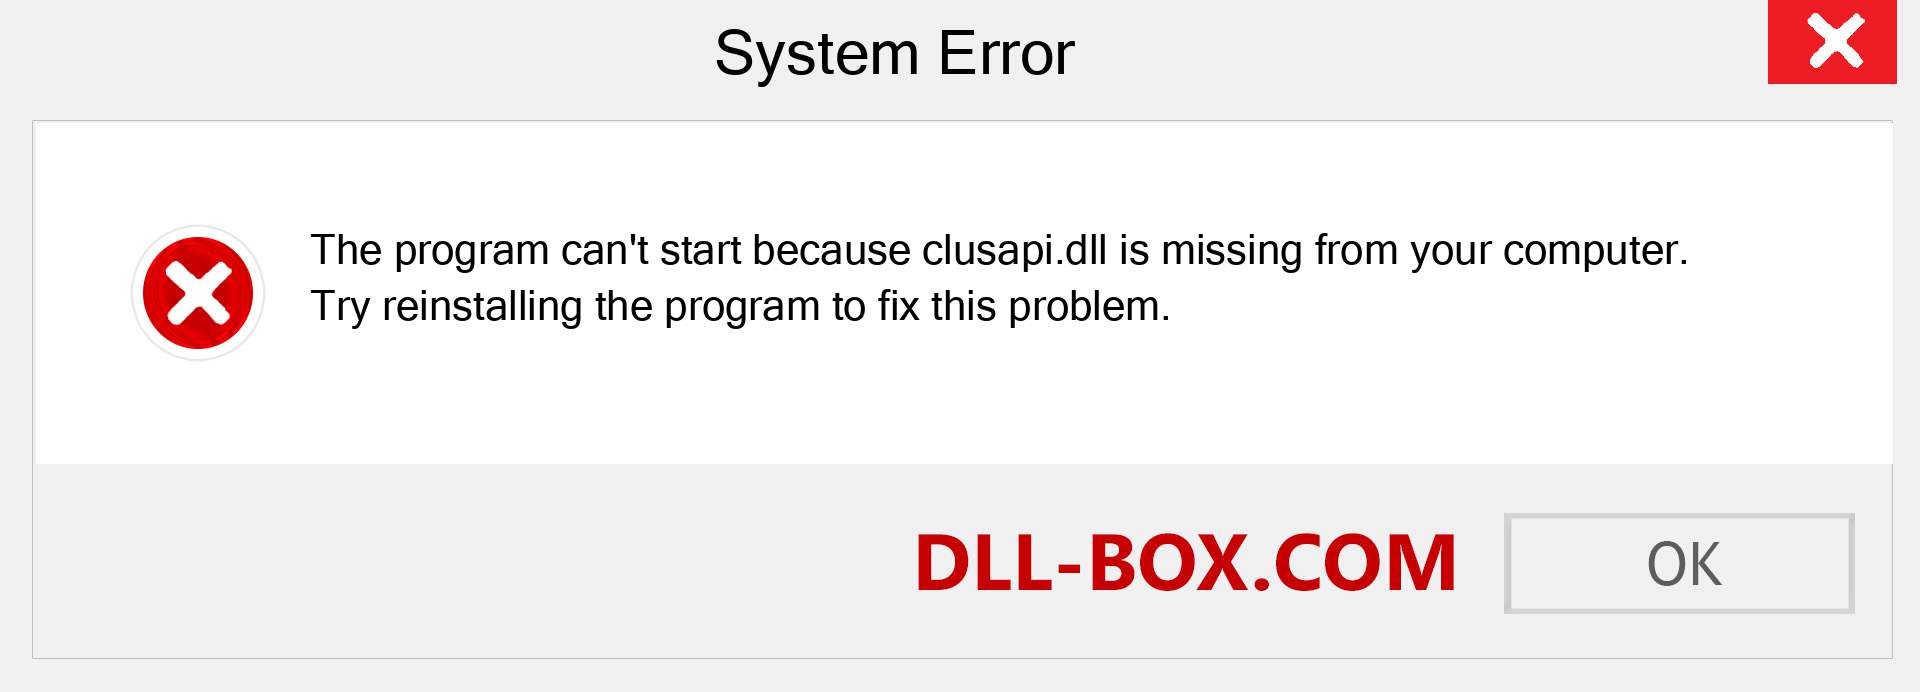  clusapi.dll file is missing?. Download for Windows 7, 8, 10 - Fix  clusapi dll Missing Error on Windows, photos, images